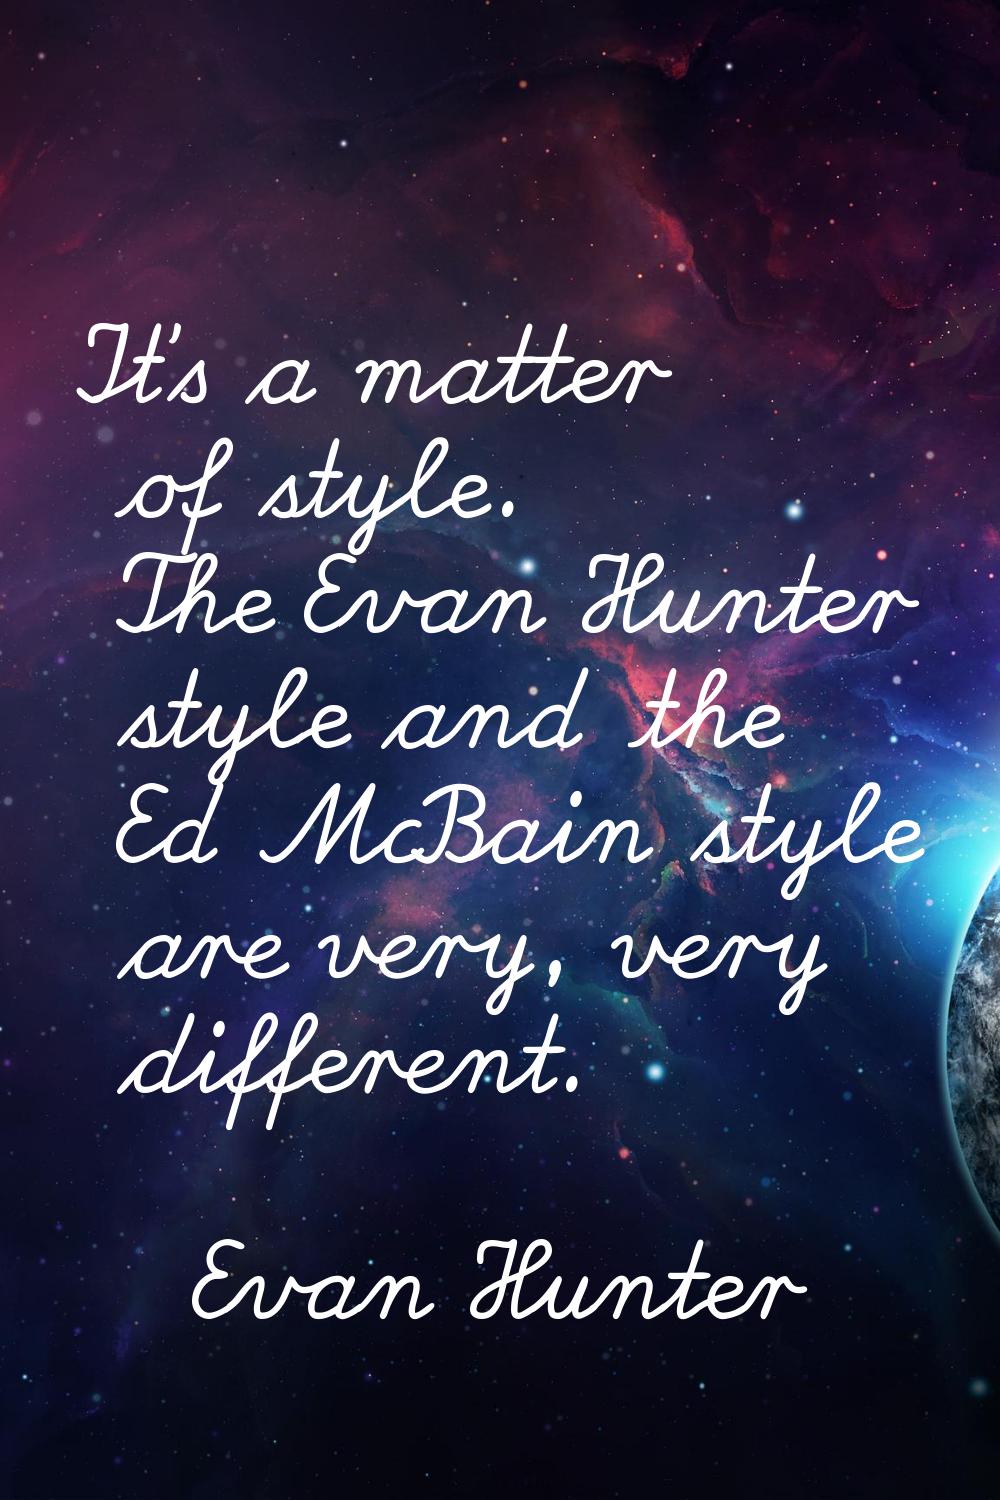 It's a matter of style. The Evan Hunter style and the Ed McBain style are very, very different.